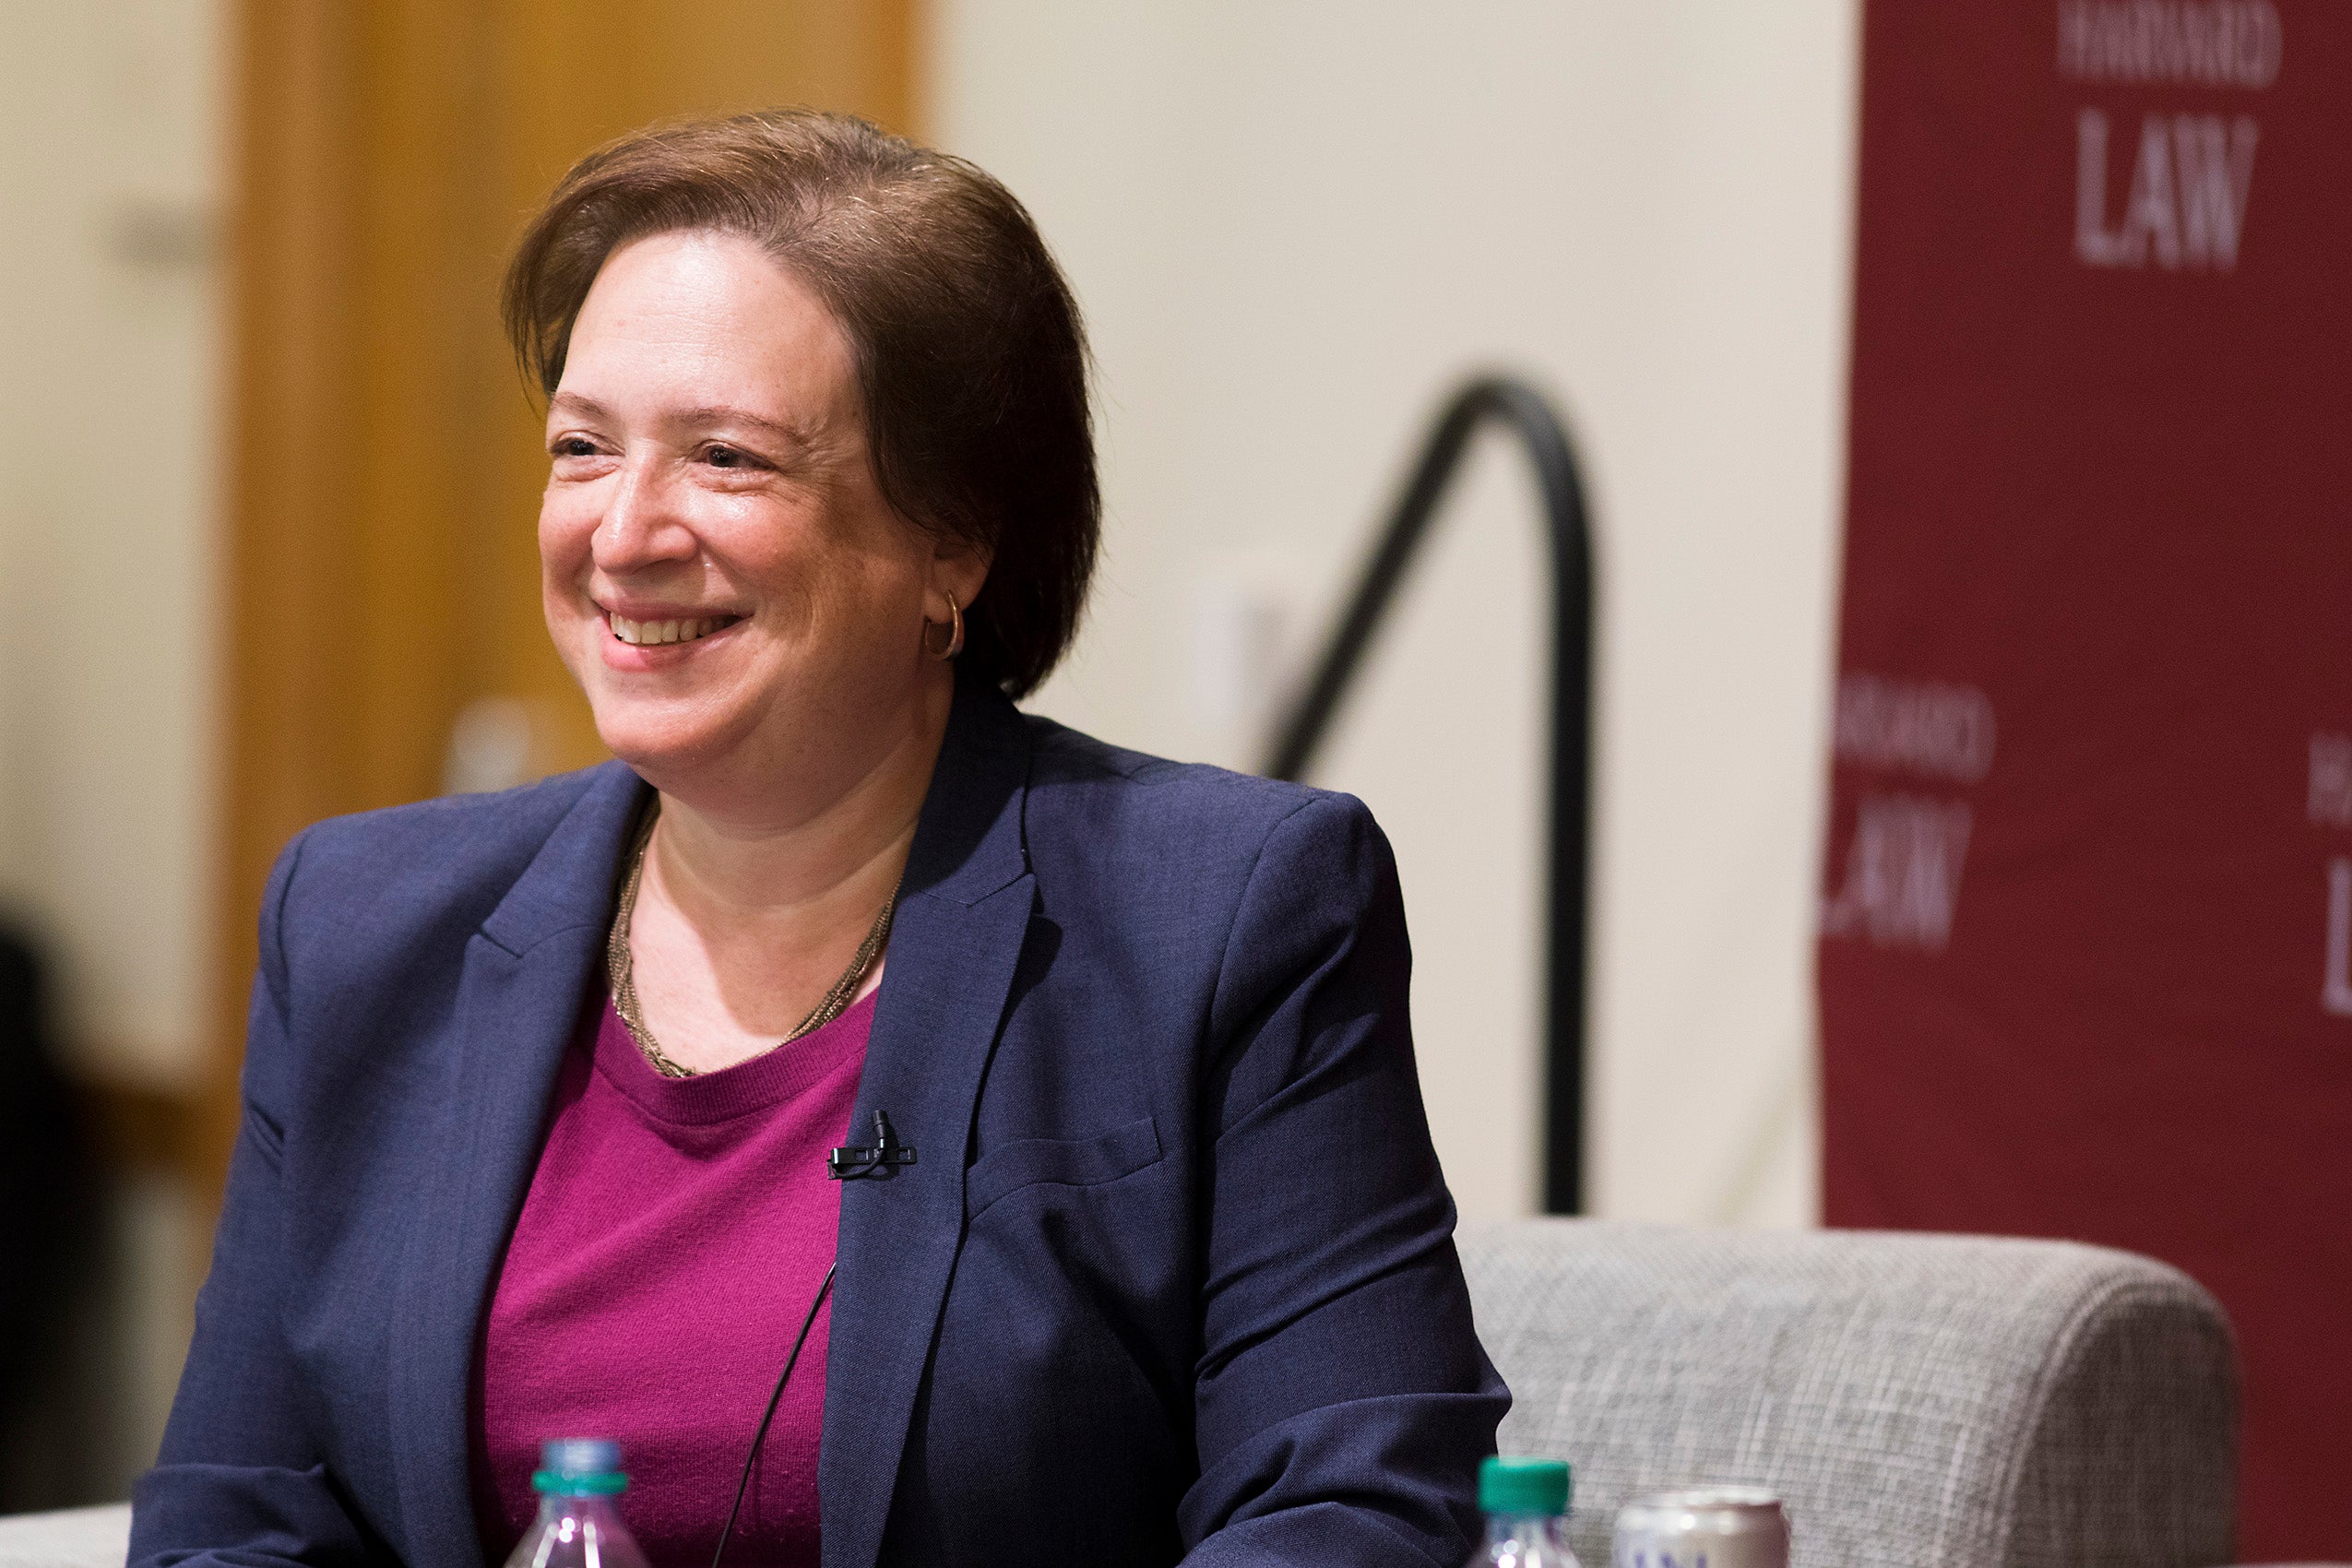 Advice to 1Ls from U.S. Supreme Court Justice Elena Kagan '86 1